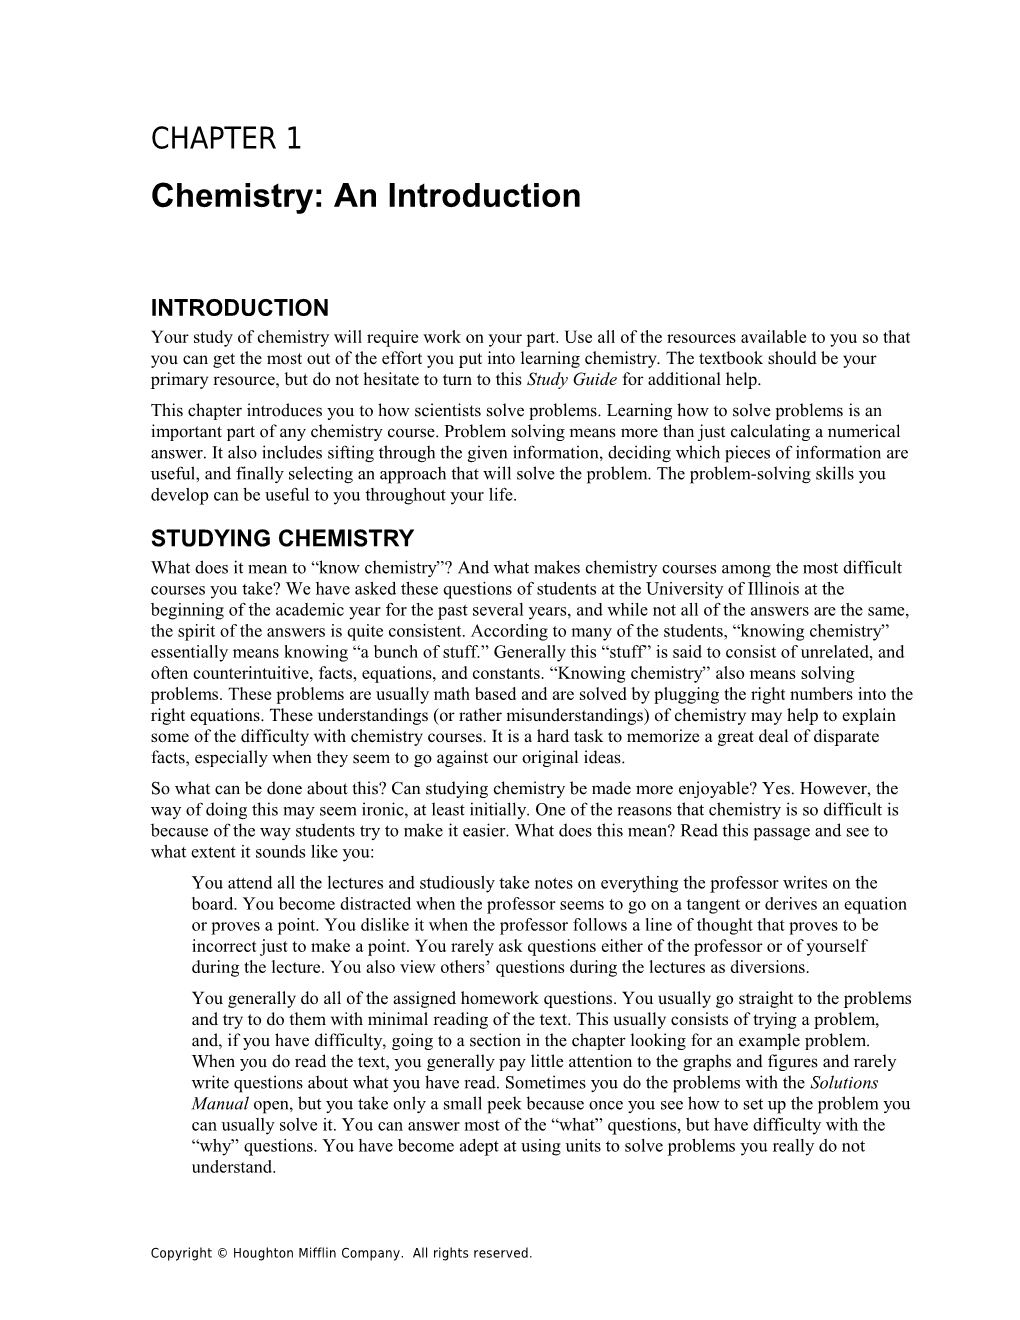 Chapter 1: Chemistry: an Introduction 1